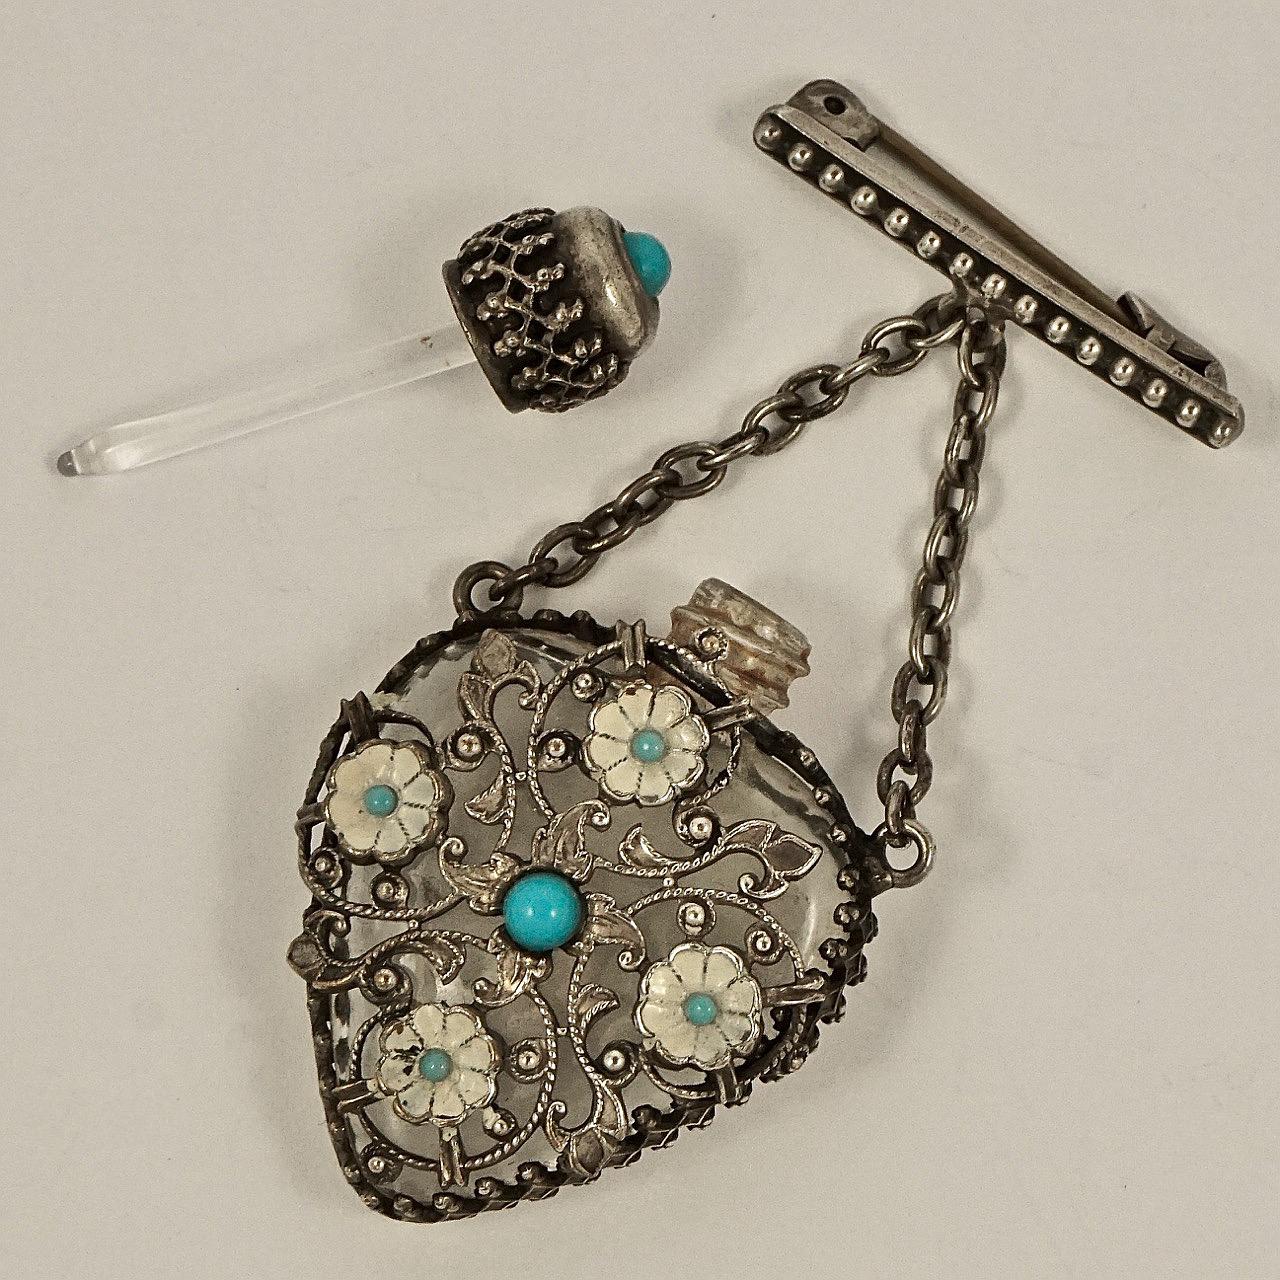 Wonderful silver plated filigree miniature perfume bottle brooch, with turquoise glass and cream enamel decoration. This is a working bottle, the top unscrews and there is a glass dauber, we have not cleaned the inside. The bottle measures length